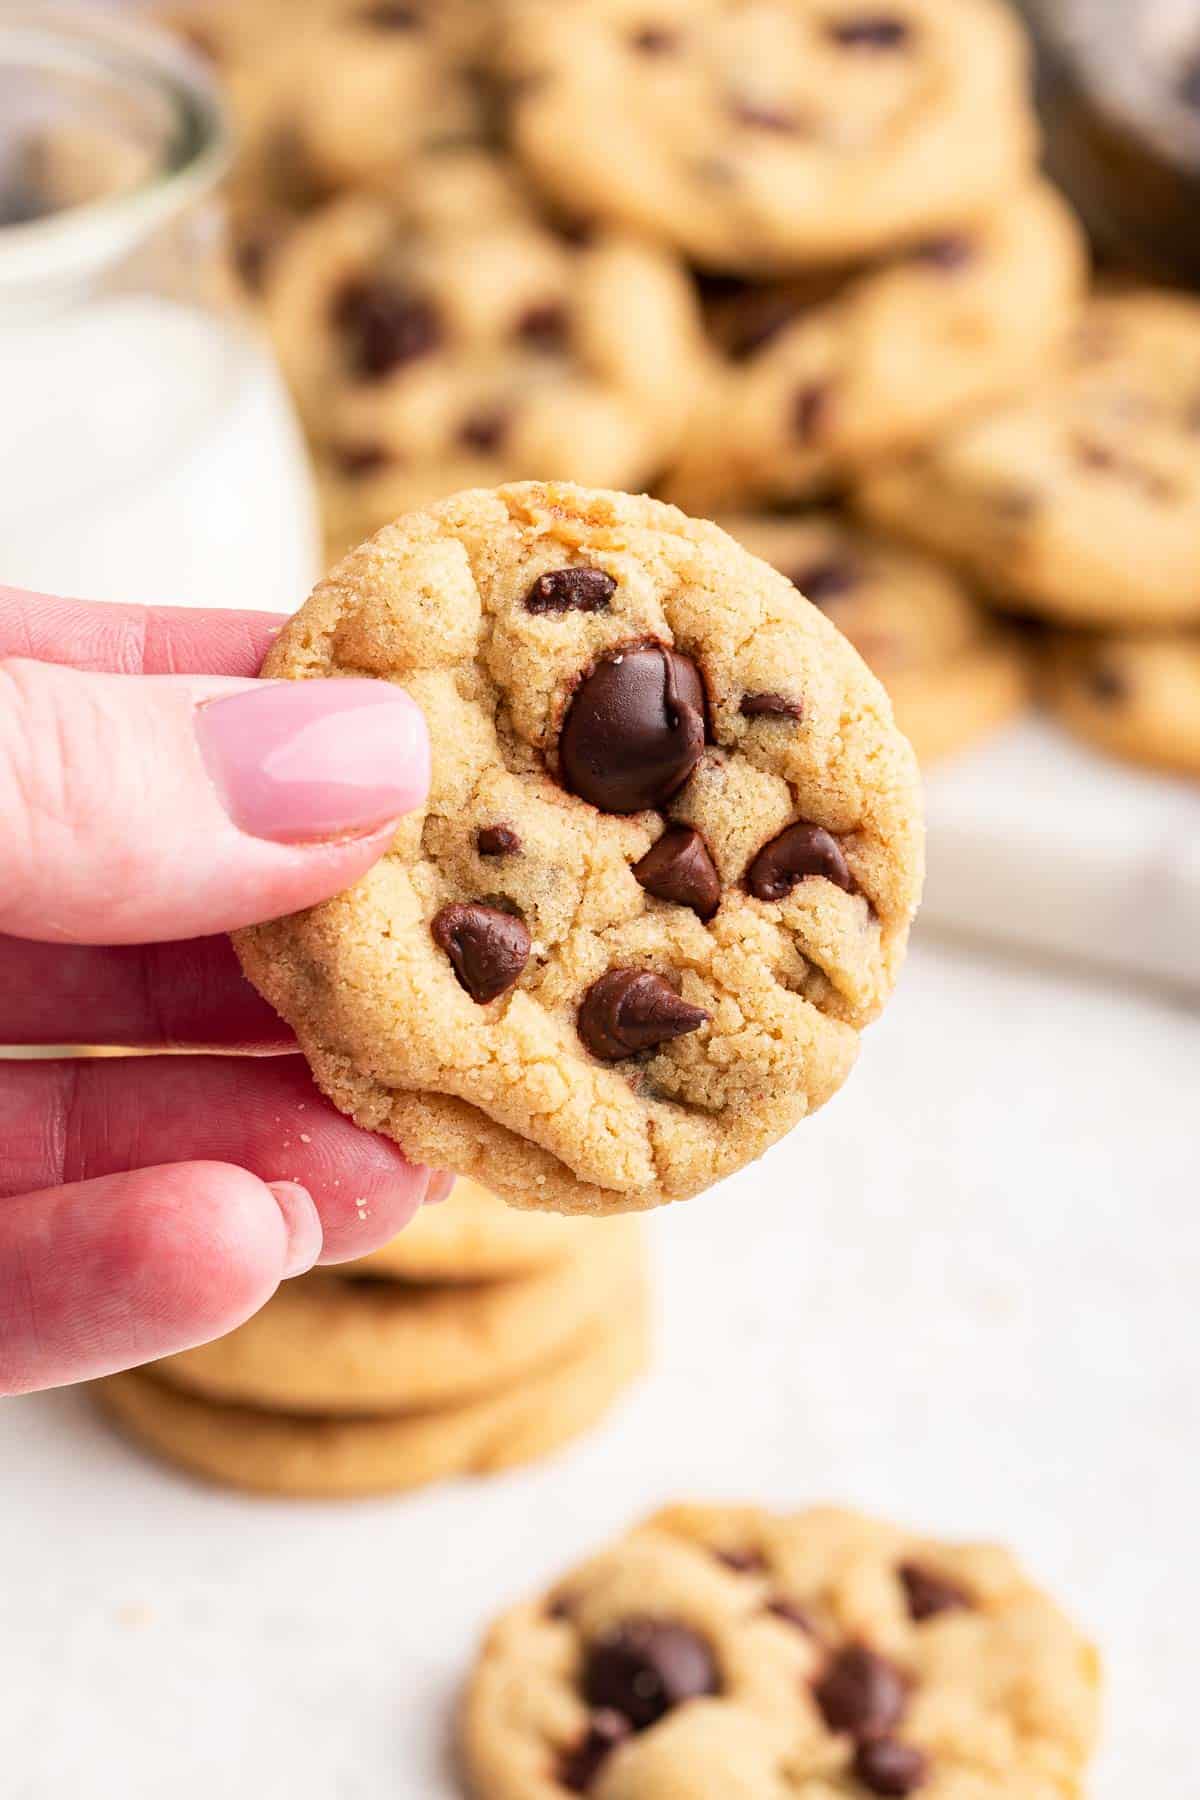 Tiny miniature chocolate chip cookie being held in hand.